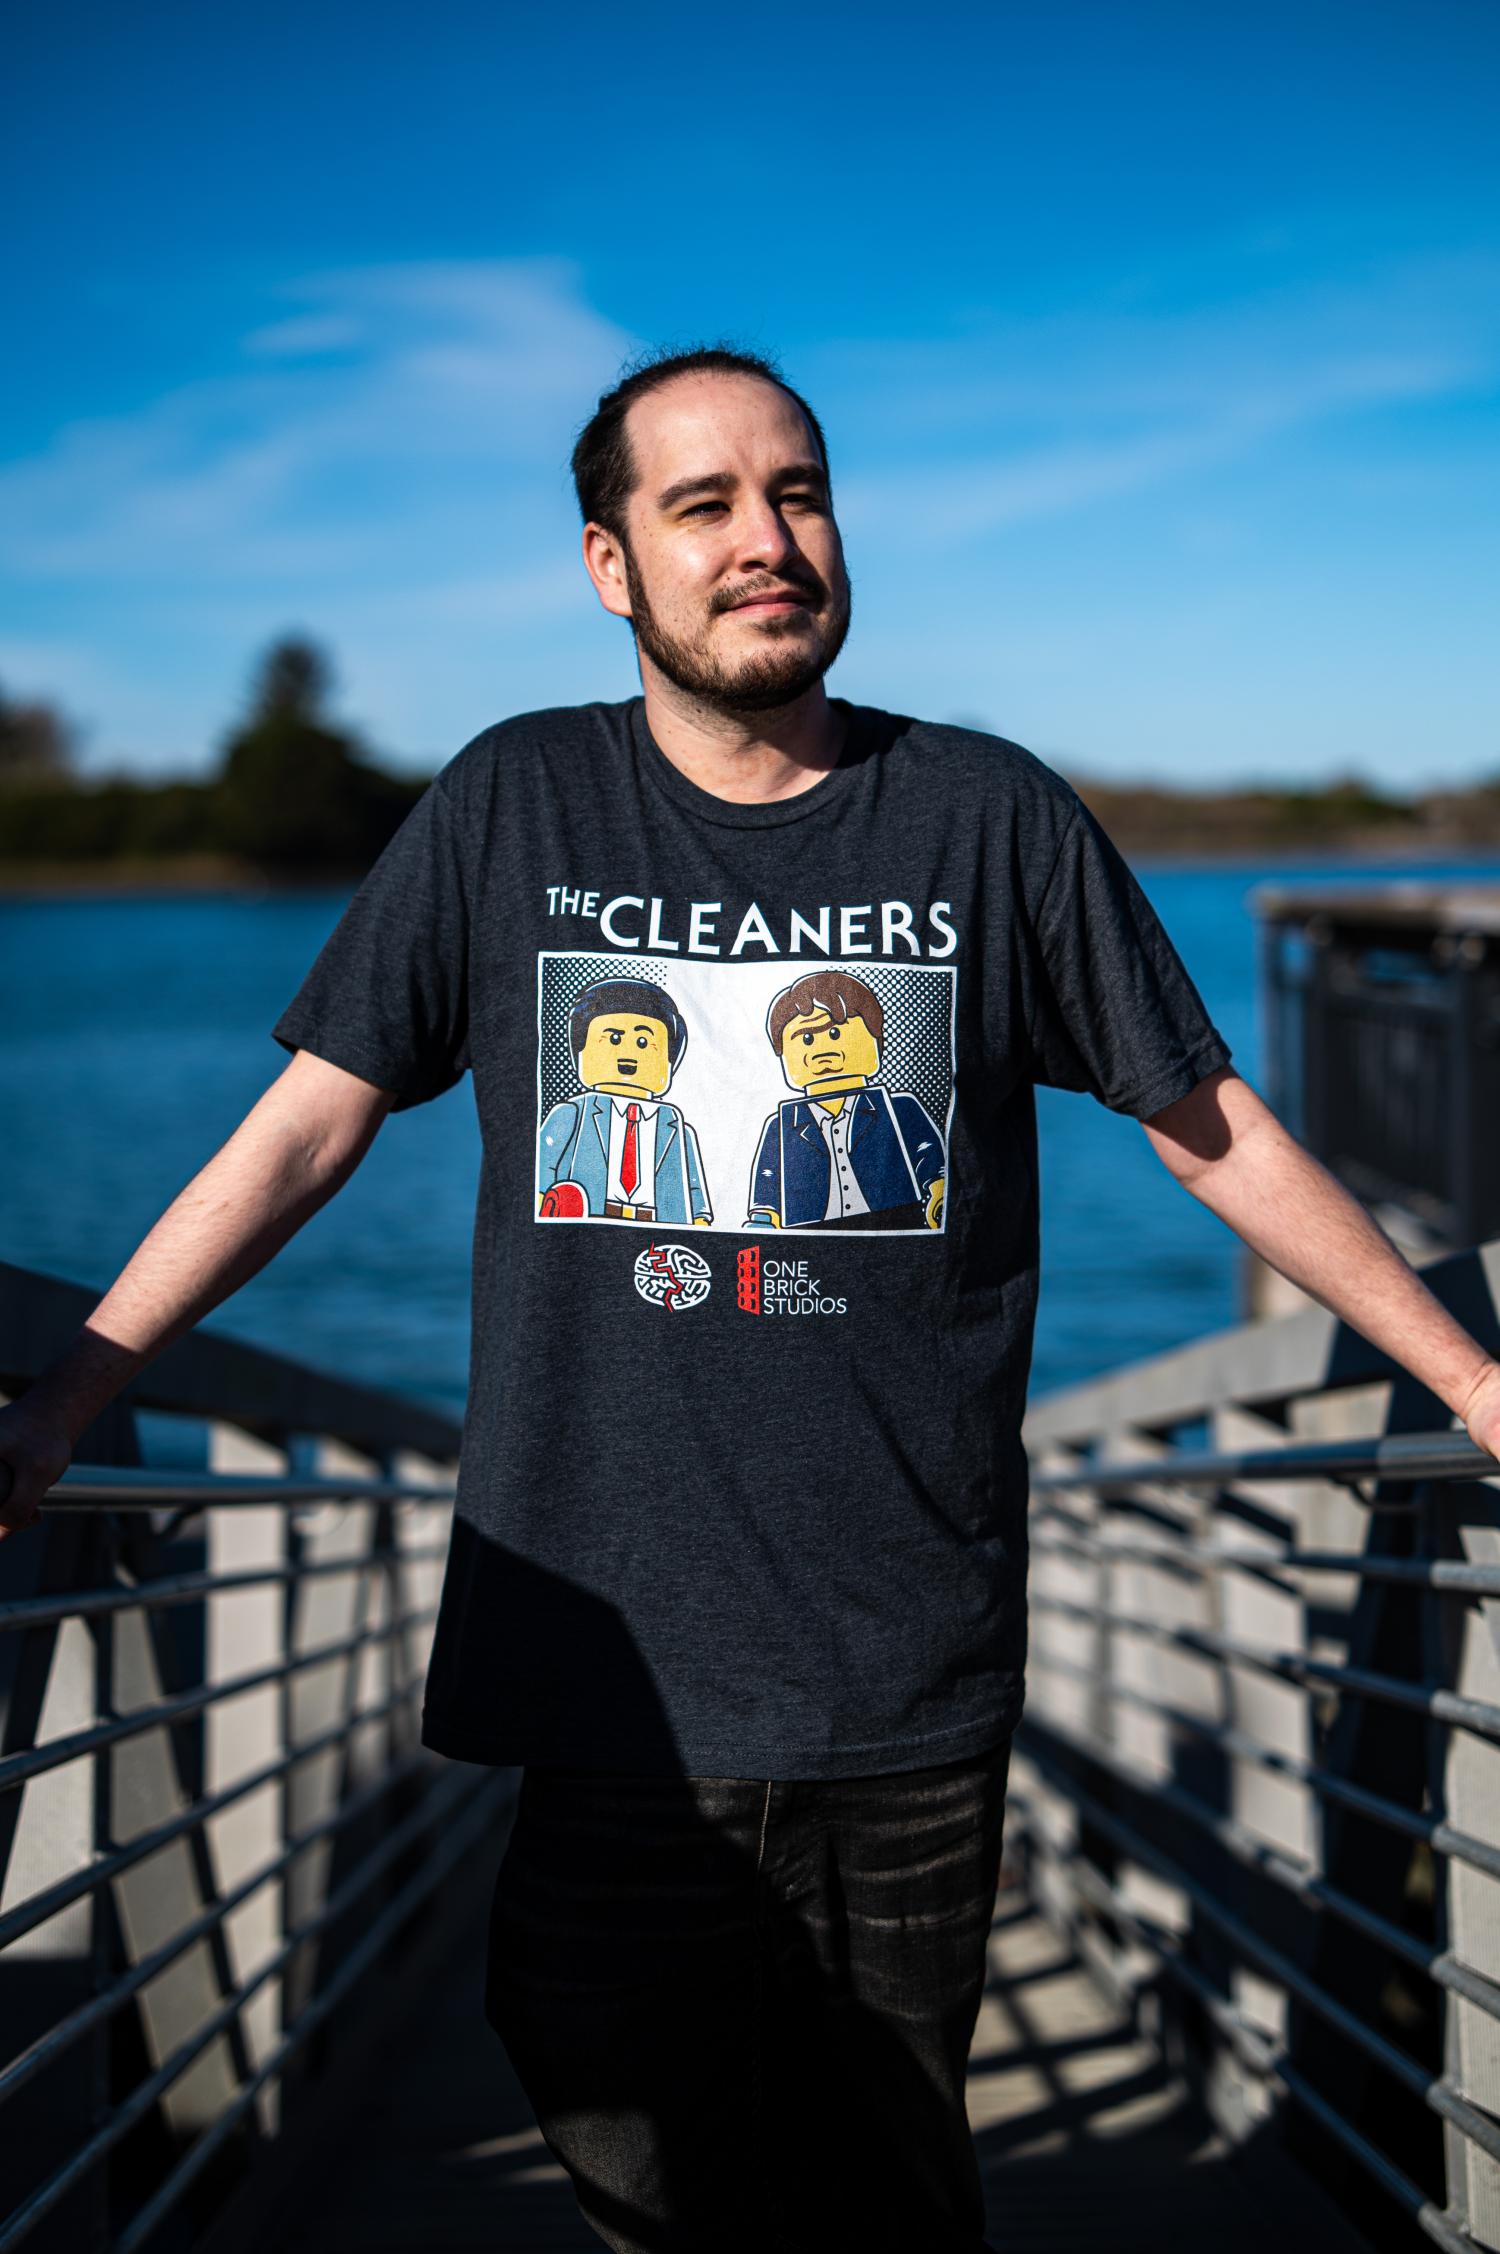 Zach Macias standing on a dock wearing a grey shirt with a logo for a LEGO stop motion film called "The Cleaners." Under that are logos for MindGame Studios and One Brick Studios.